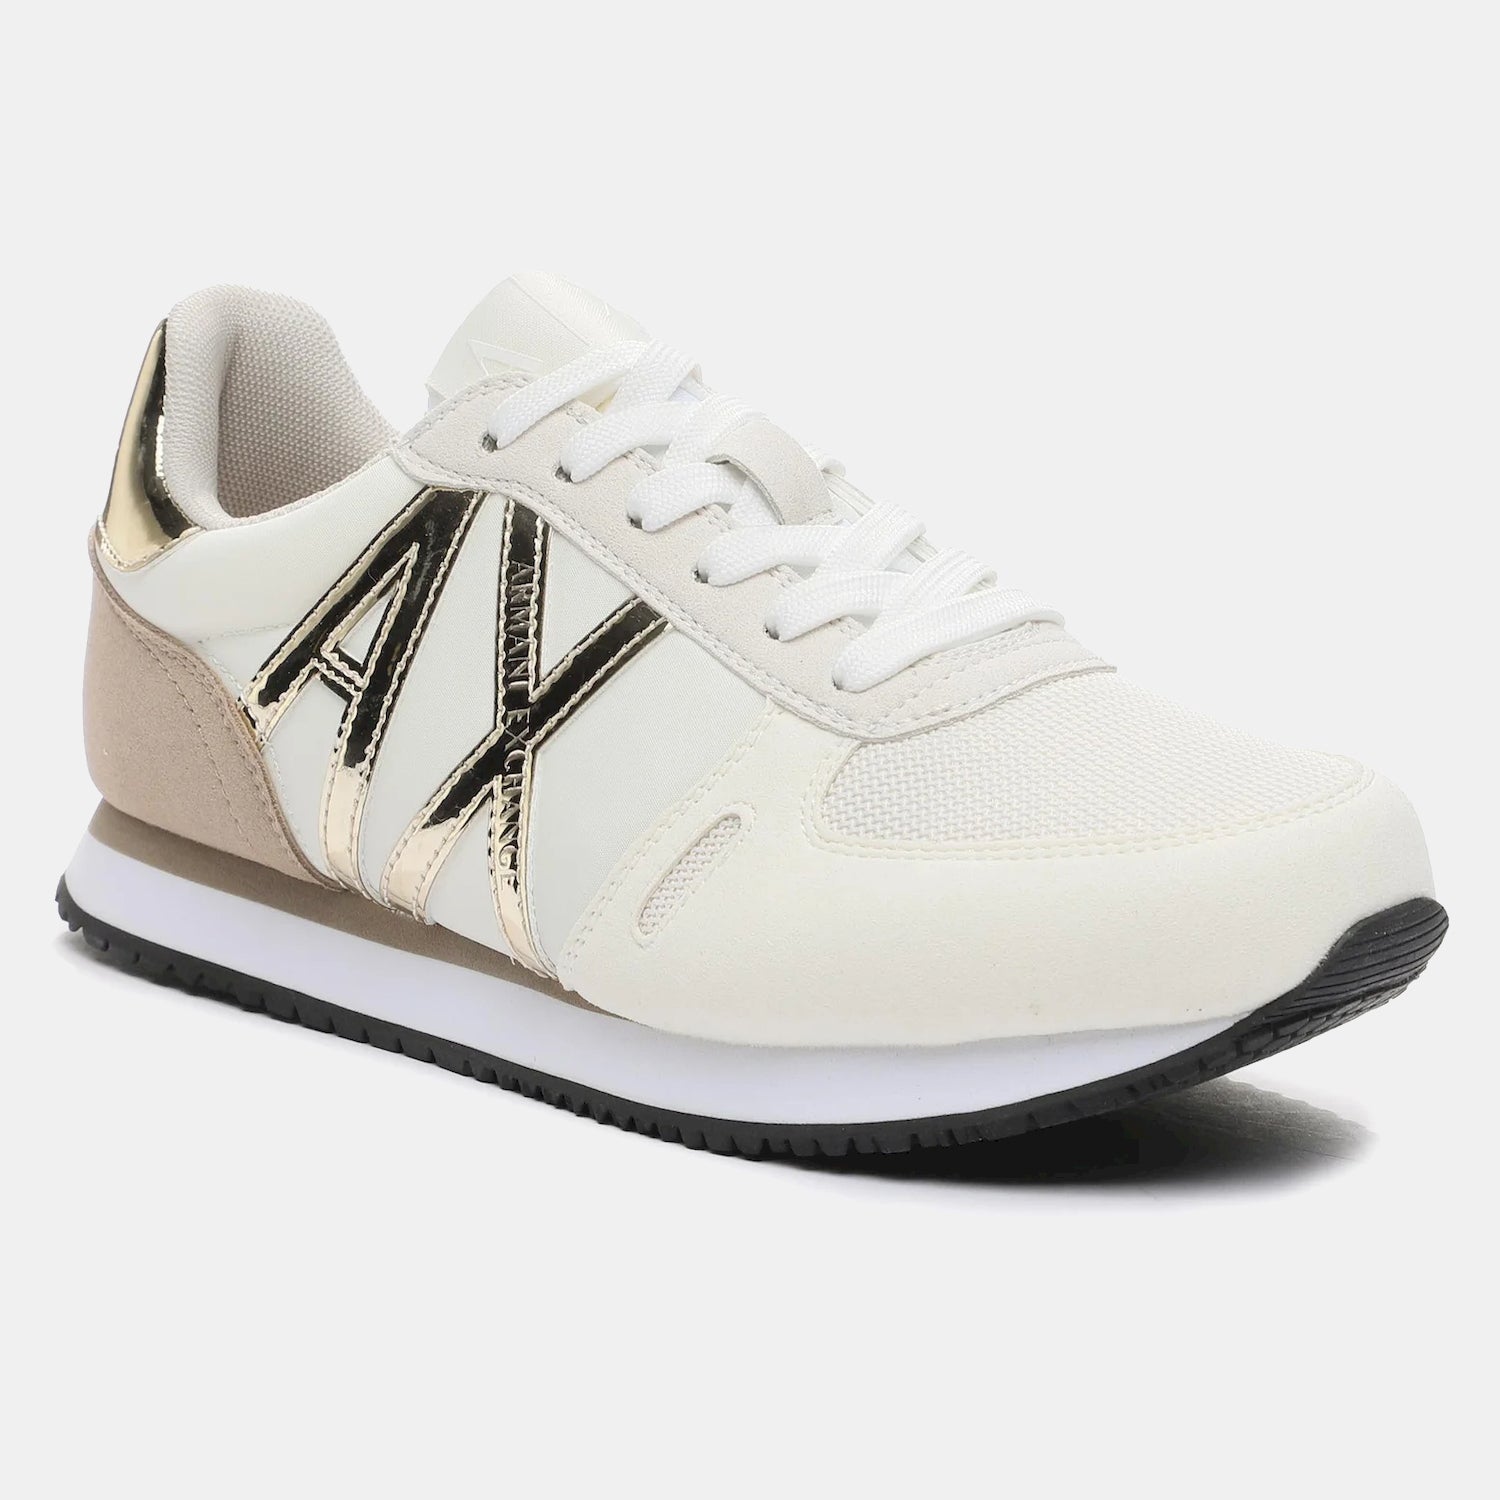 Armani Exchange Sapatilhas Sneakers Shoes Xdx031 Xv137 Beige Gold Beige Ouro_shot6